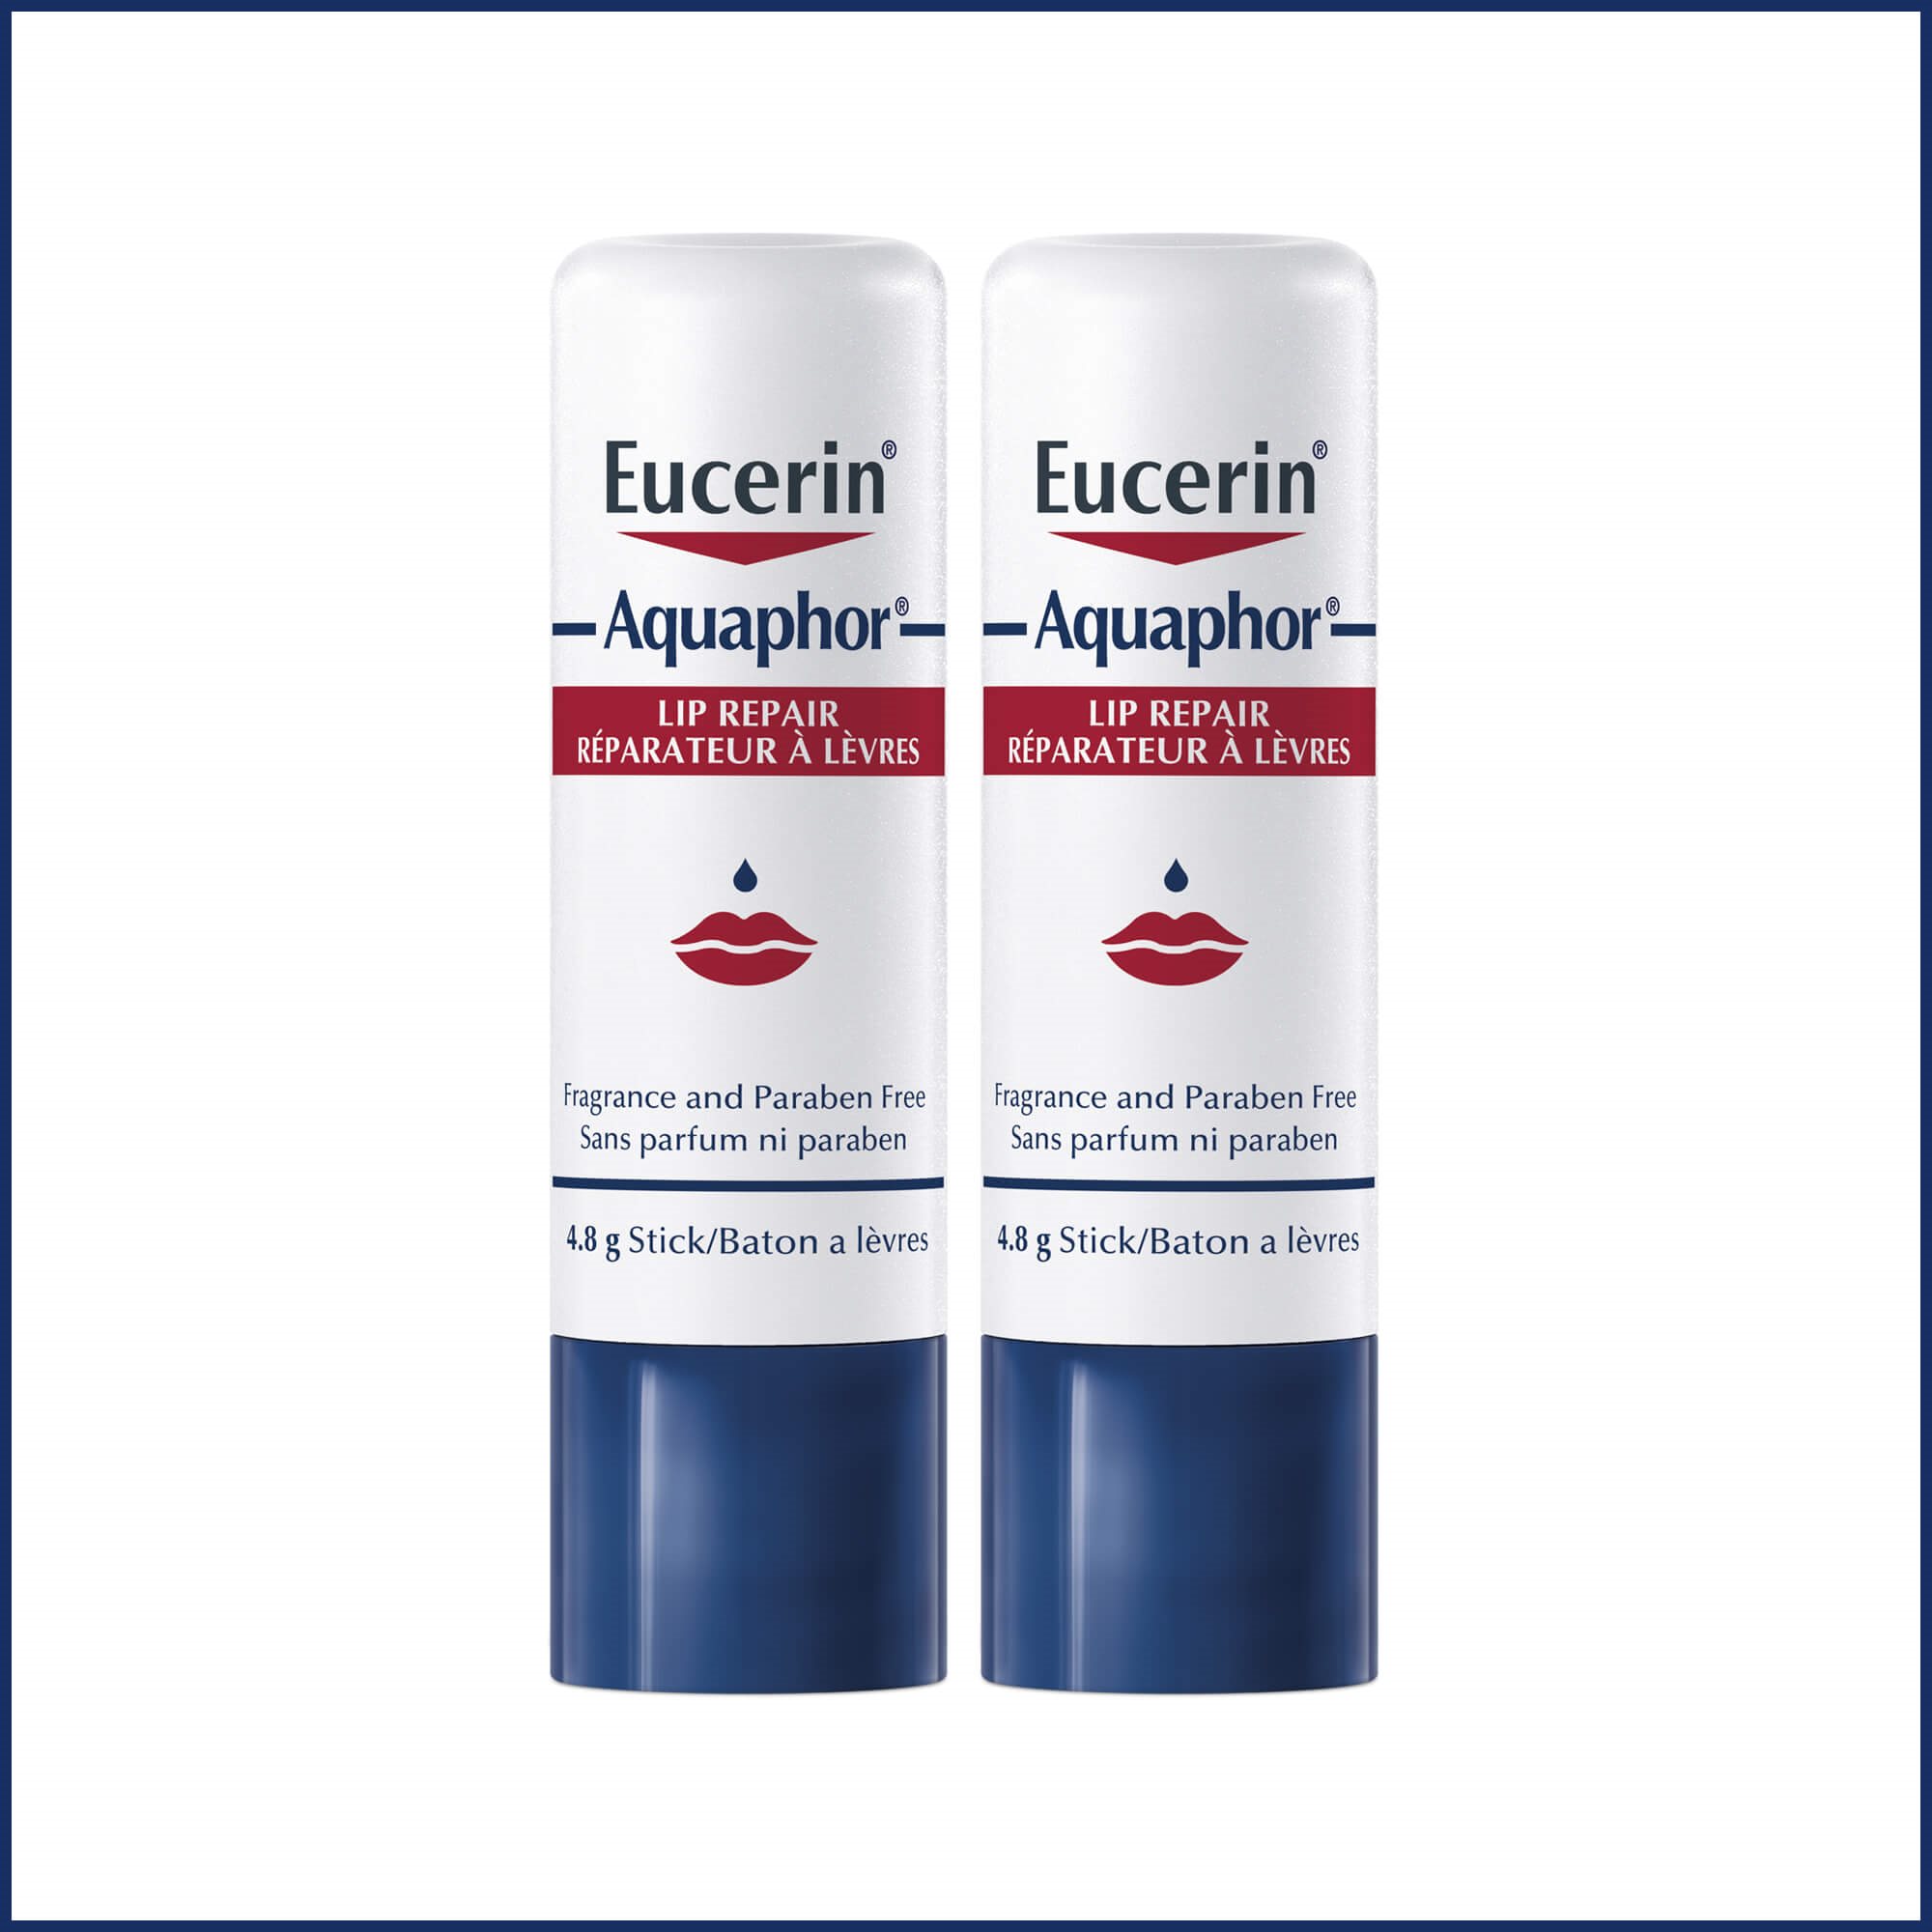 Close up image of two Aquaphor lip repair products on white background.